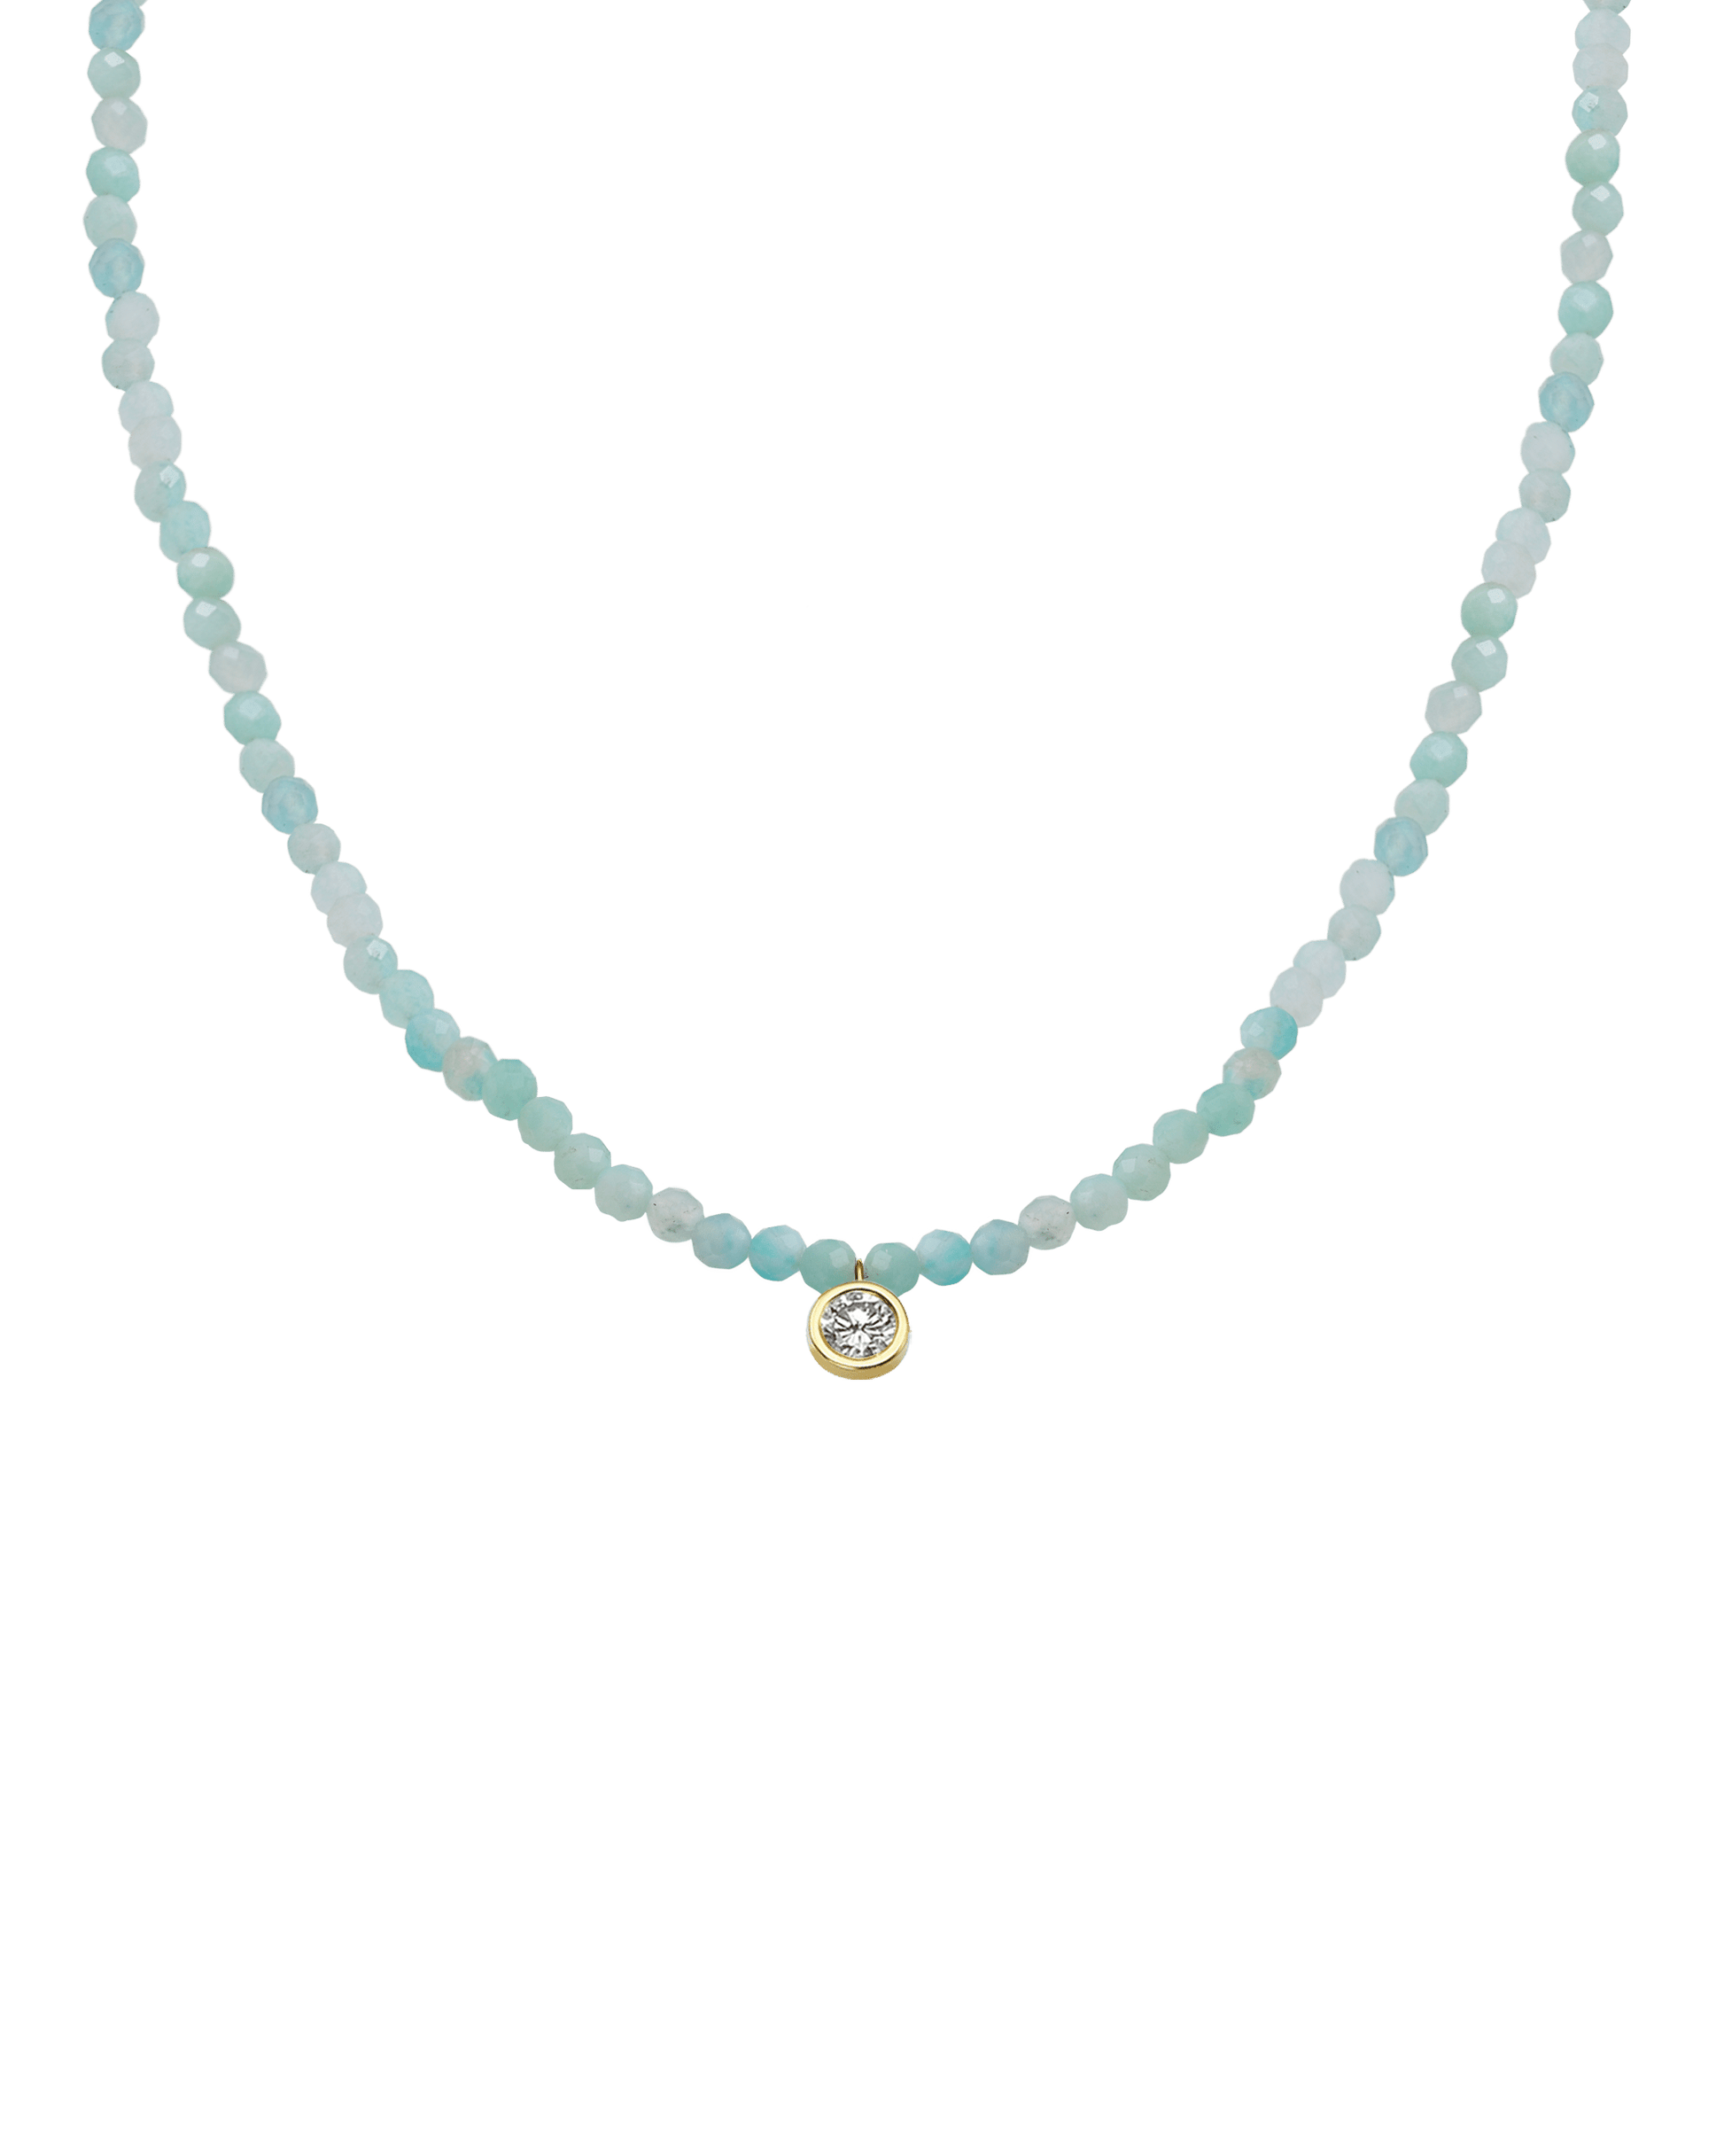 Apatite Gemstone & Diamond Necklace - 14K Yellow Gold Necklaces 14K Solid Gold Natural Apatite Extra Large: 0.20ct 14"